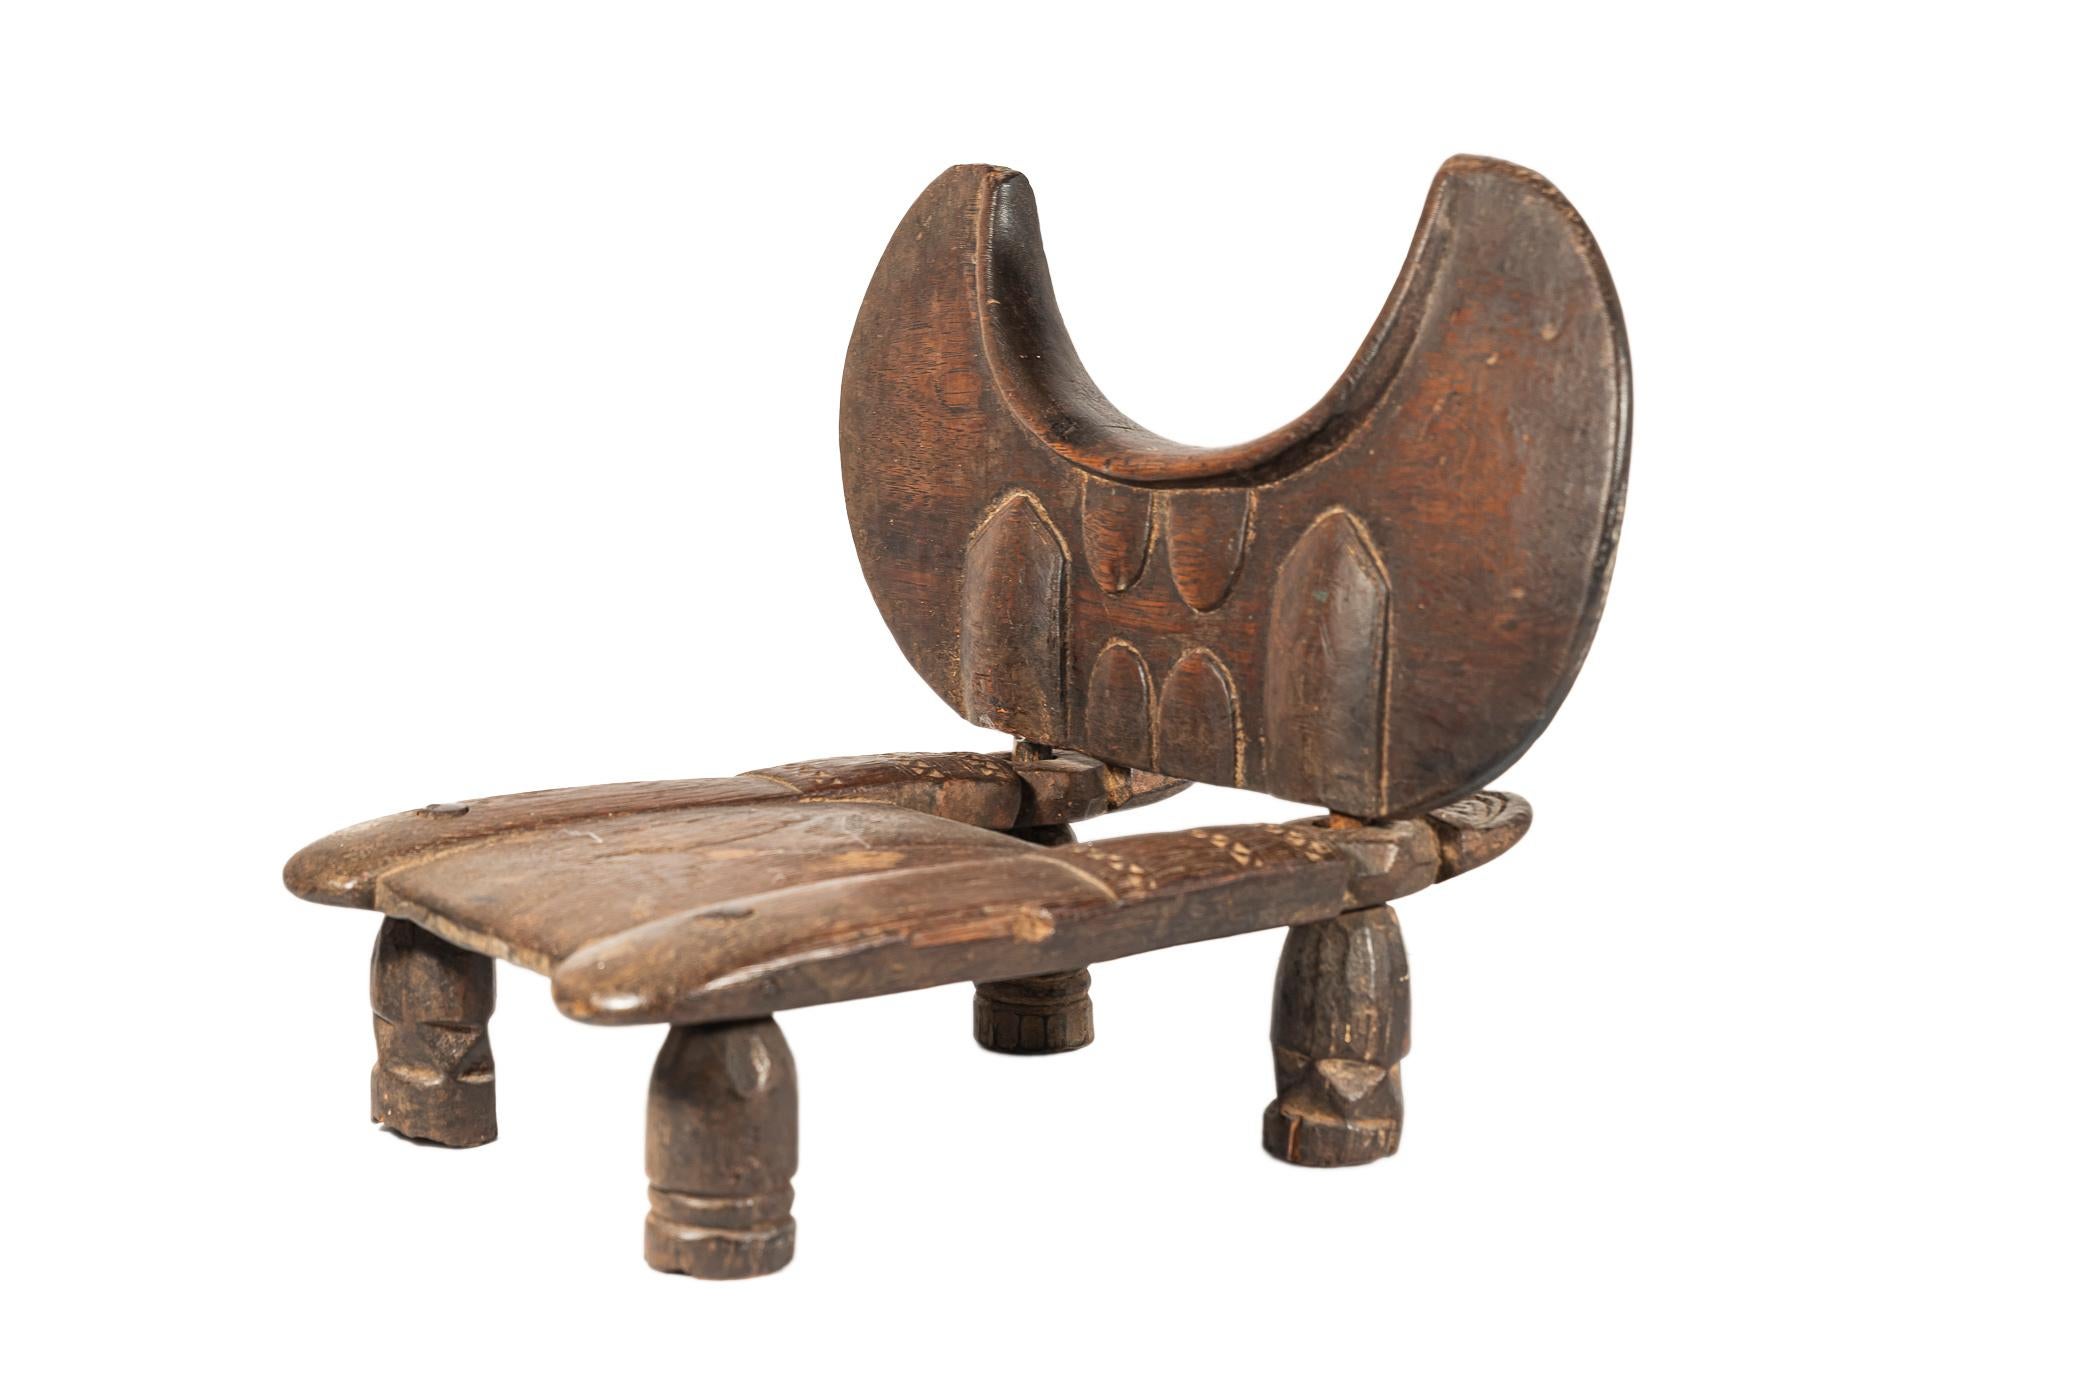 Little Mendé chair, 
Wood, 
The crescent-shaped backrest with carved decorations,
The seat decorated with small carved triangles,
Early 20th century, Sierra Leone. 

Measures: Height 30 cm, seat height 22 cm, width 35 cm, depth 32 cm.

Provenance: